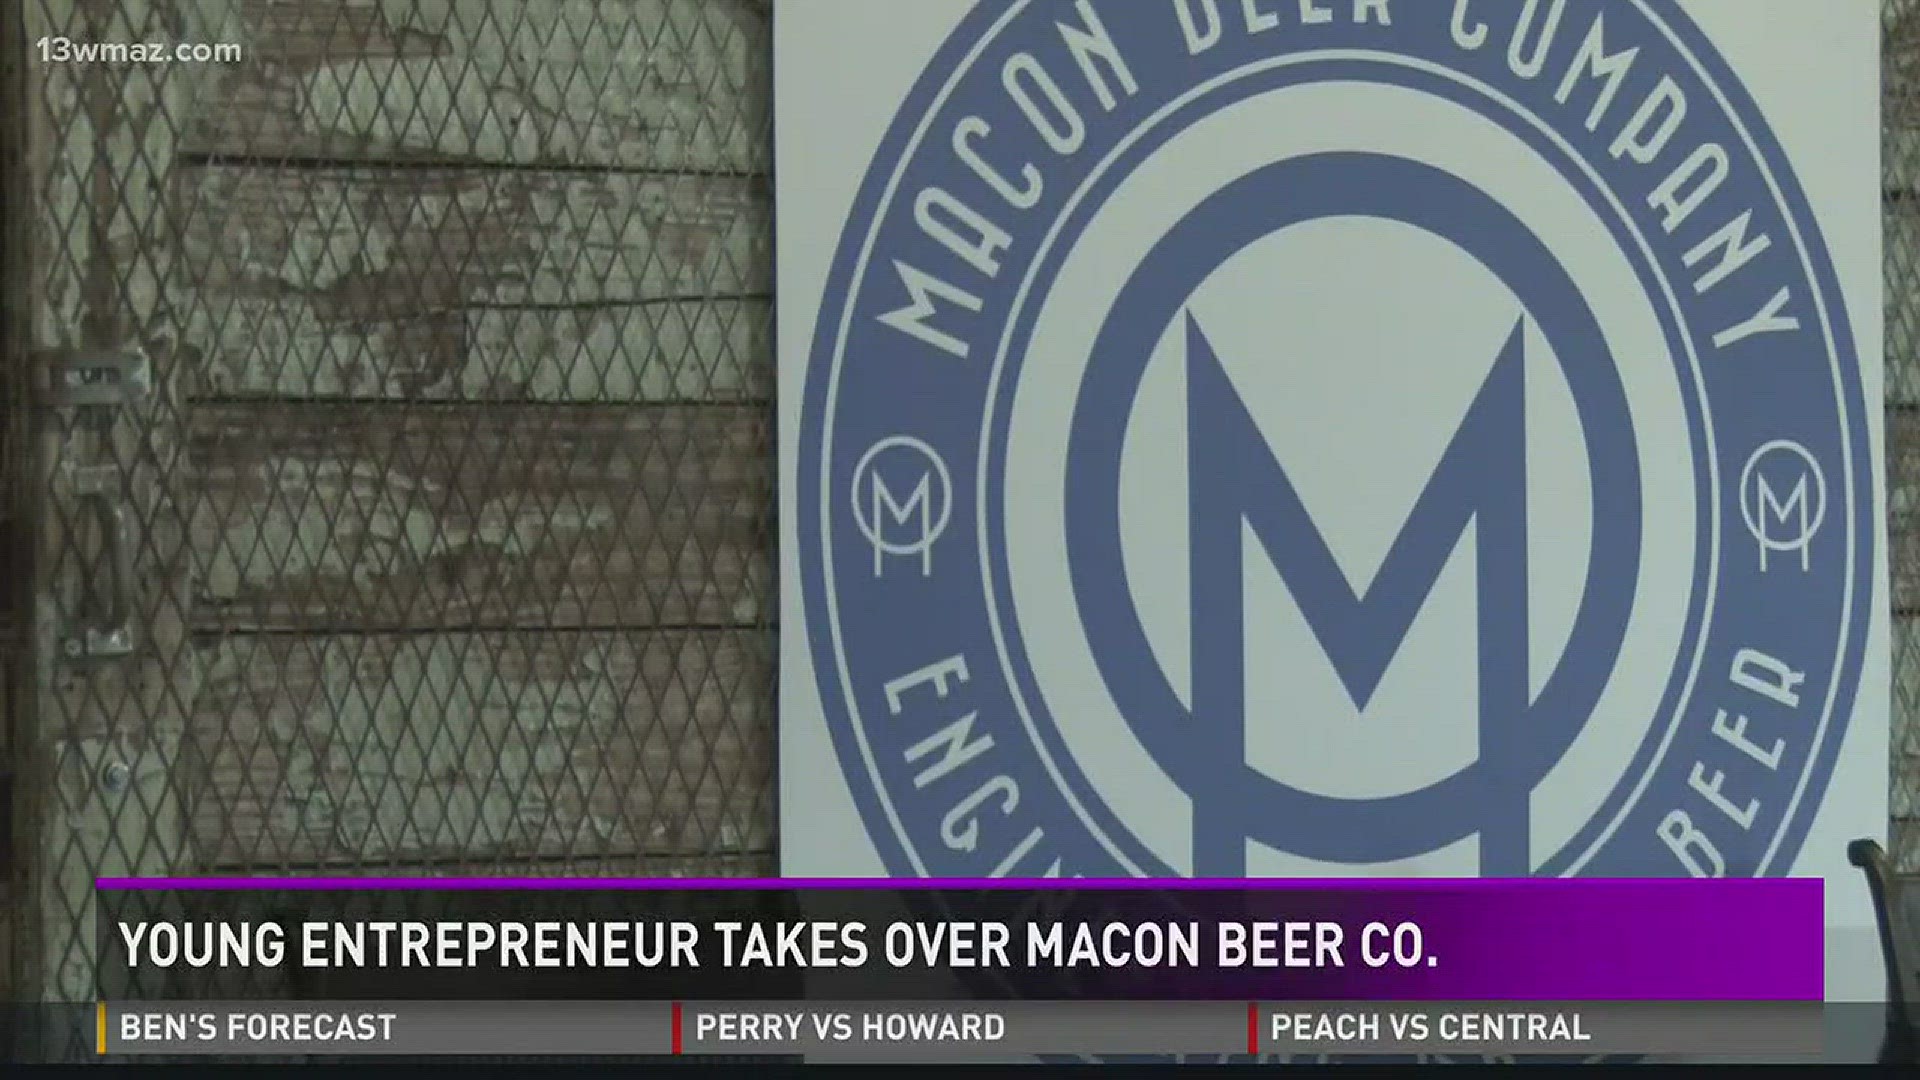 Young entrepreneur takes over Macon Beer Co.